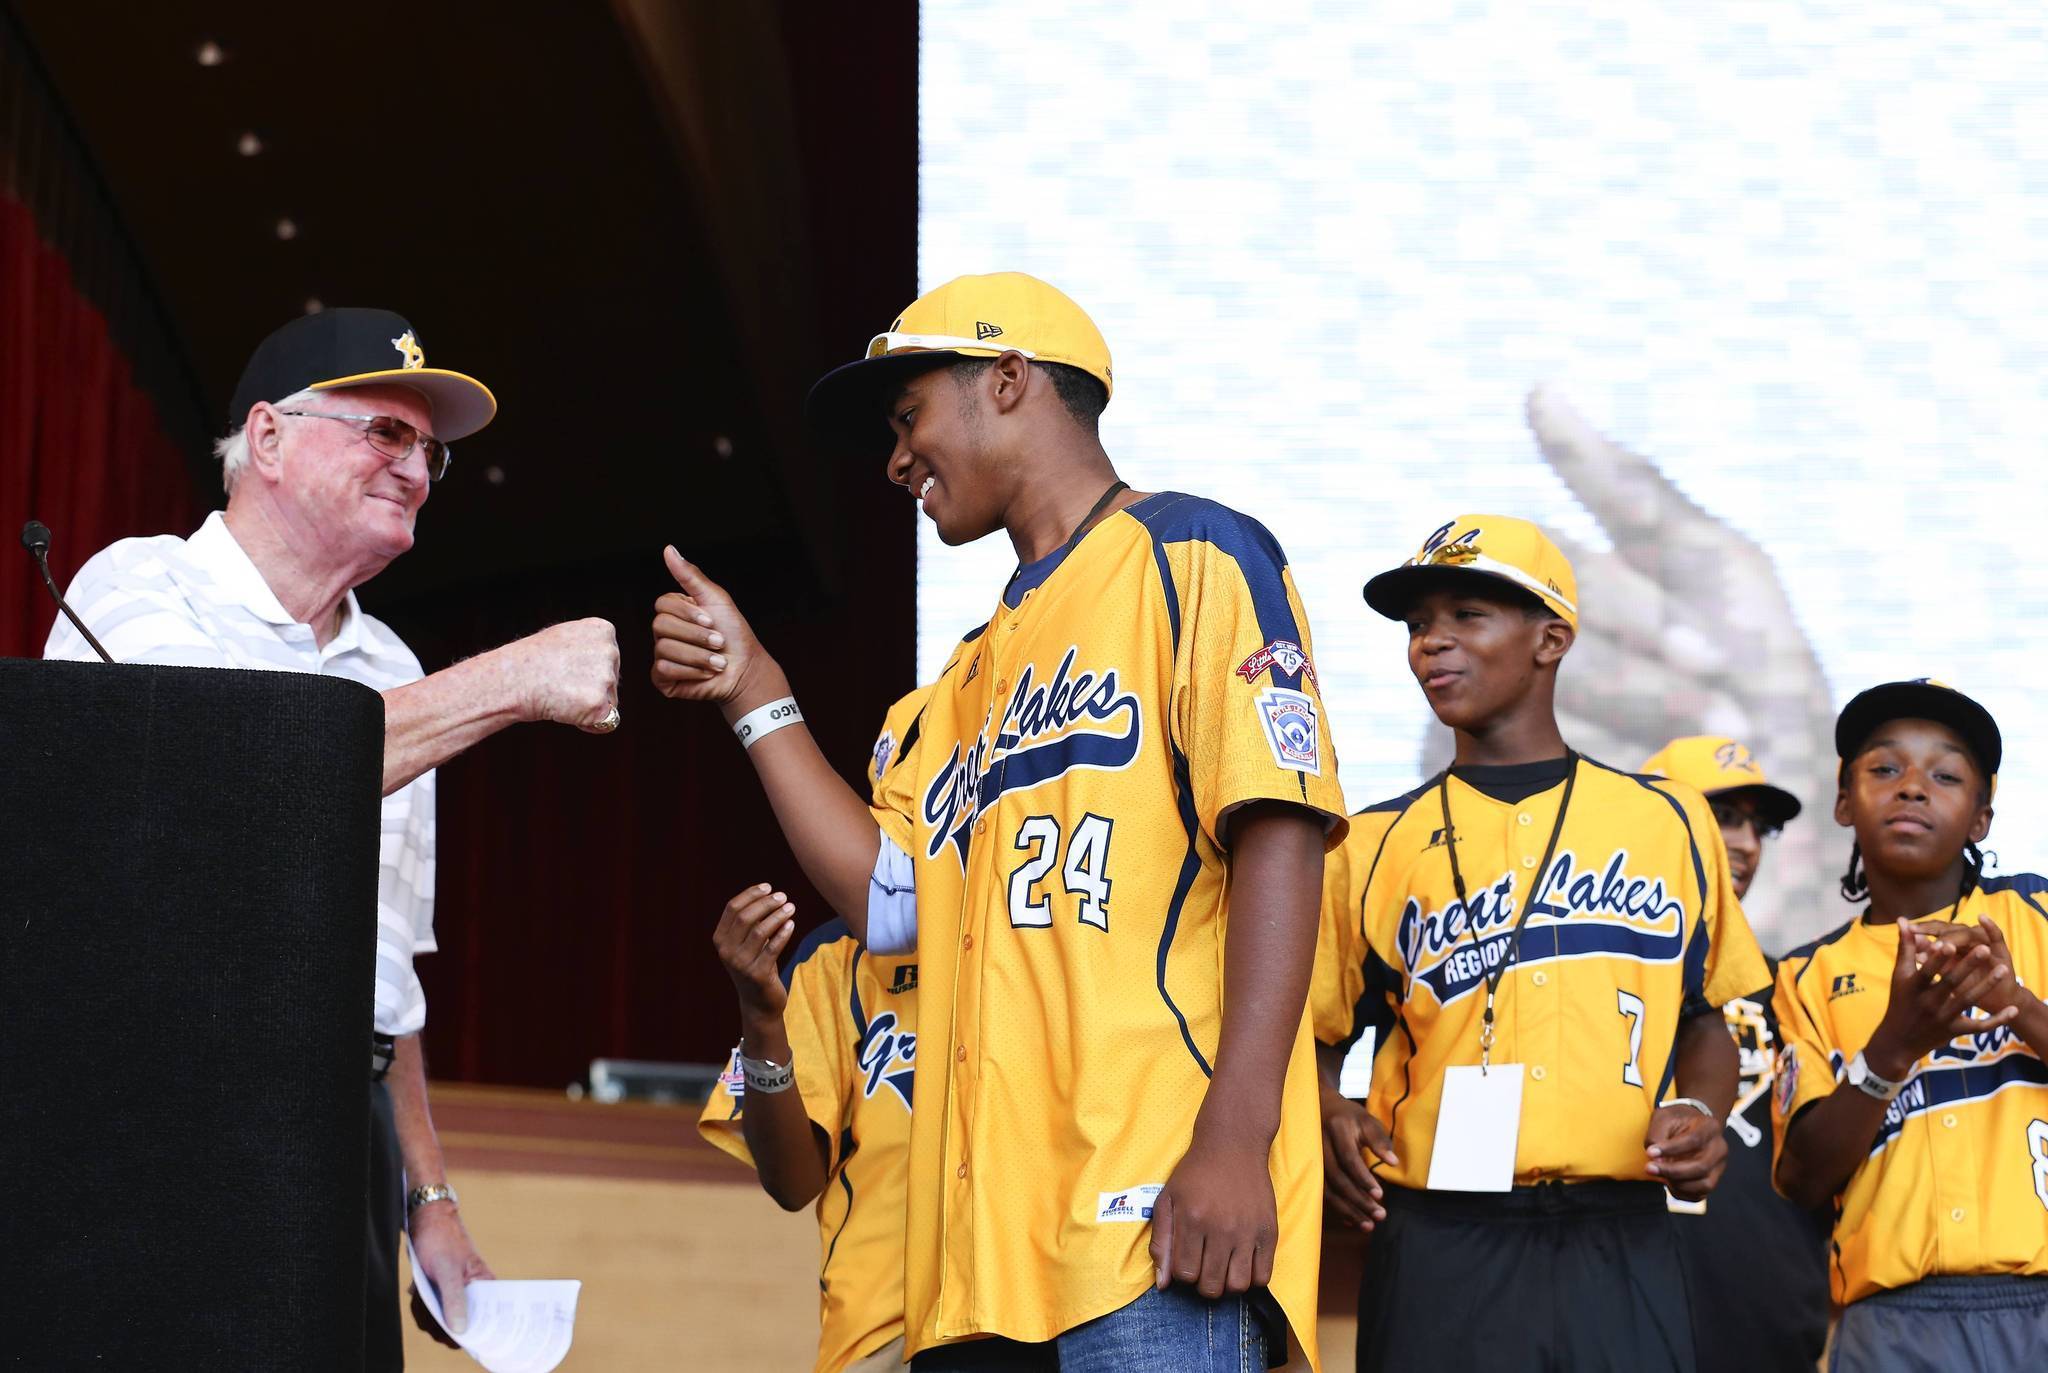 PHOTOS: Jackie Robinson West All-Stars honored at U.S. Cellular